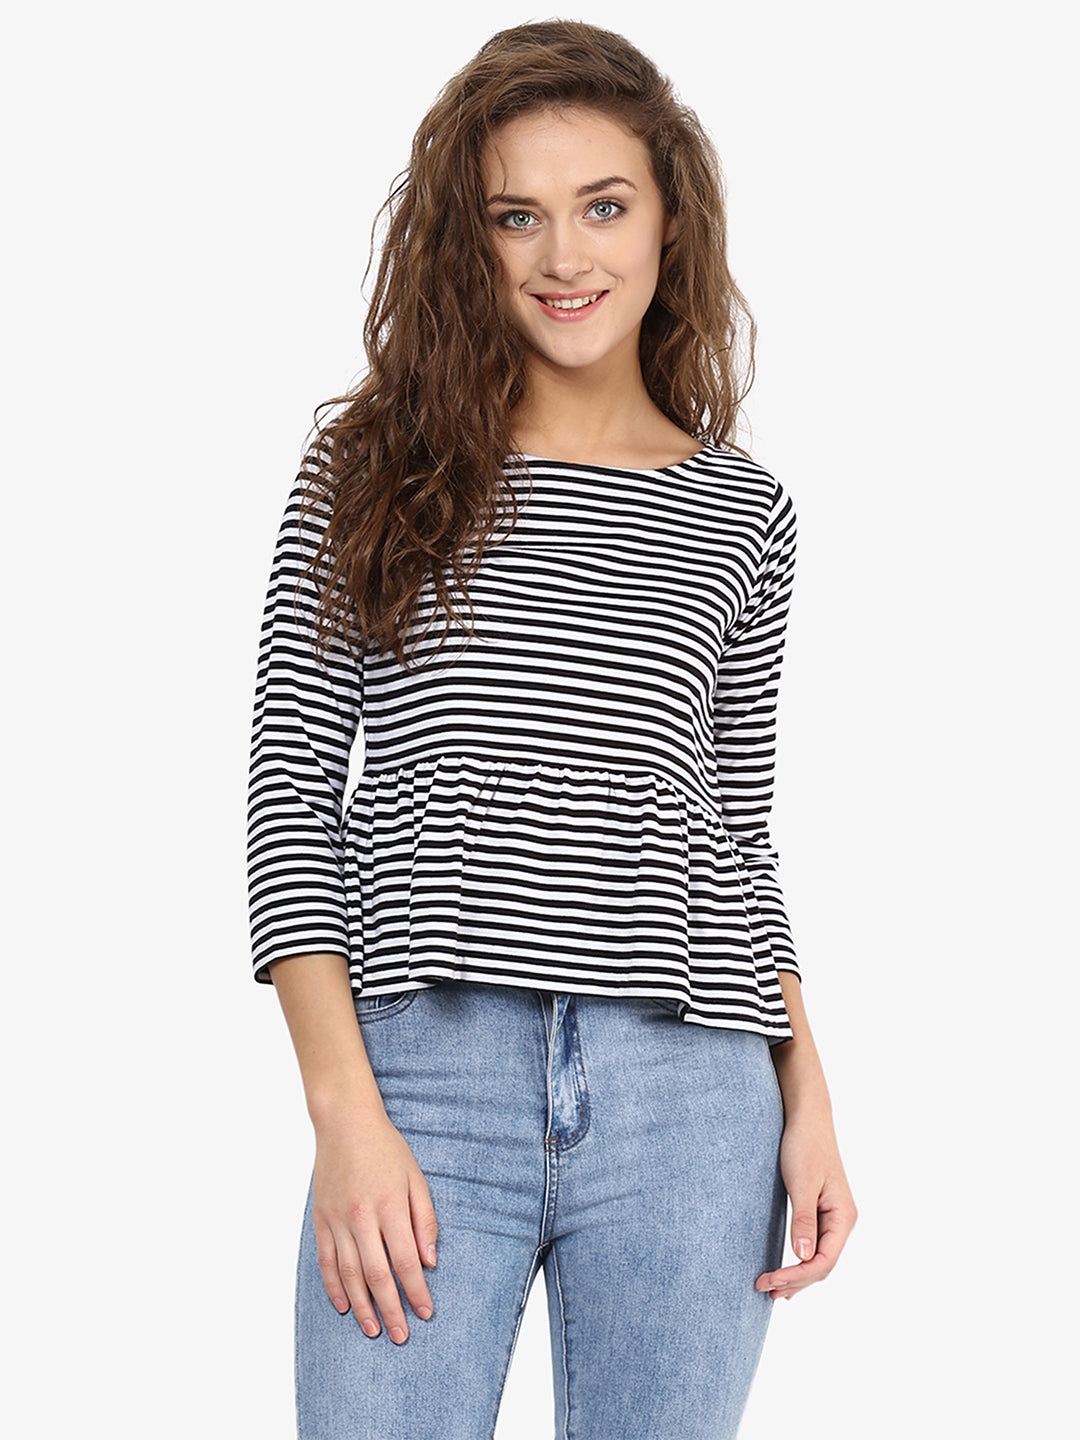 MISS CHASE | Black and White Round Neck 3/4 Sleeve Monochrome Striped Peplum Top